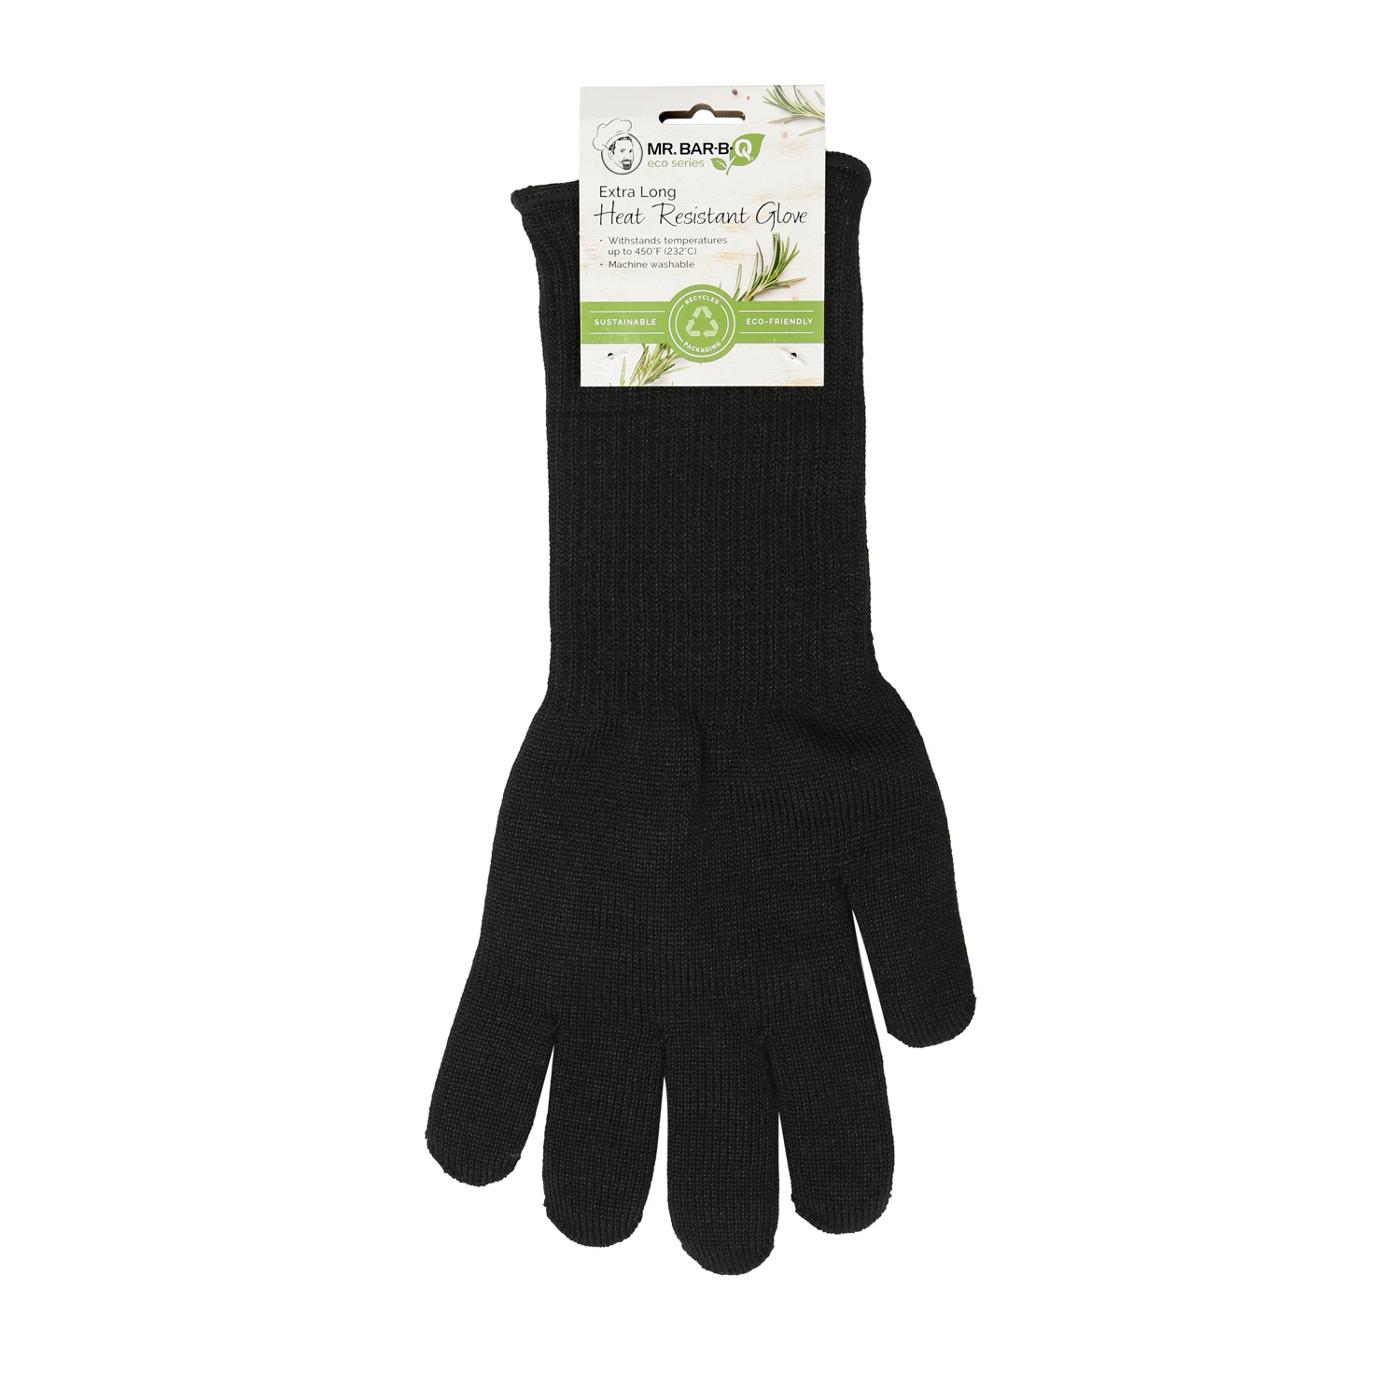 Mr. Bar-B-Q Eco Series Extra Long Heat Resistant Glove; image 1 of 2